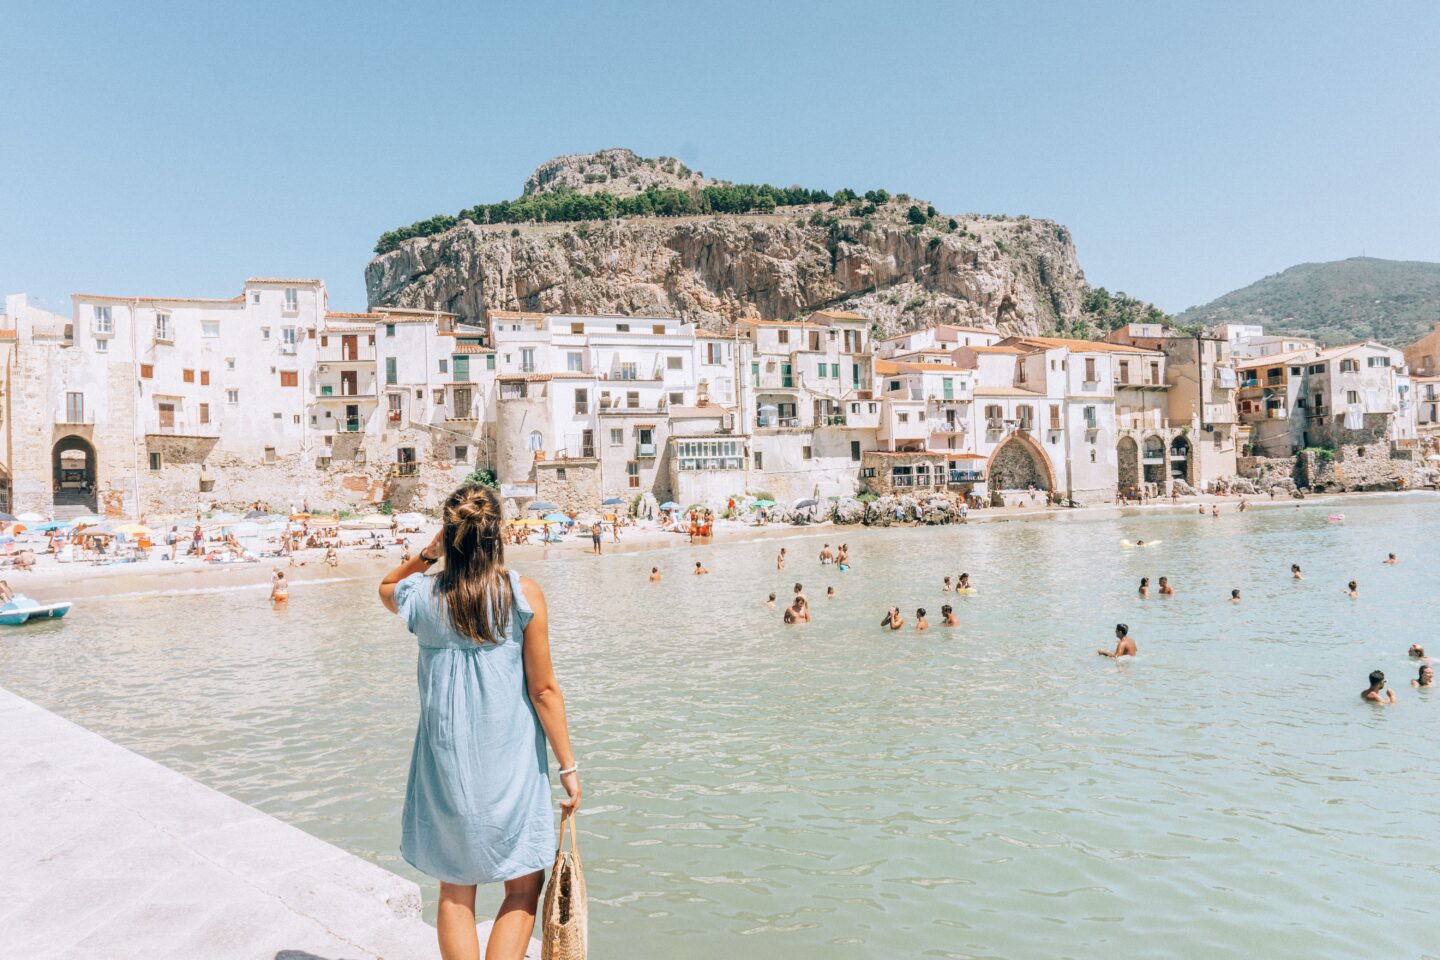 A girl with a blue dress on looks back towards the beach, La Rocca mountain and the seaside town of Cefalù in Sicily